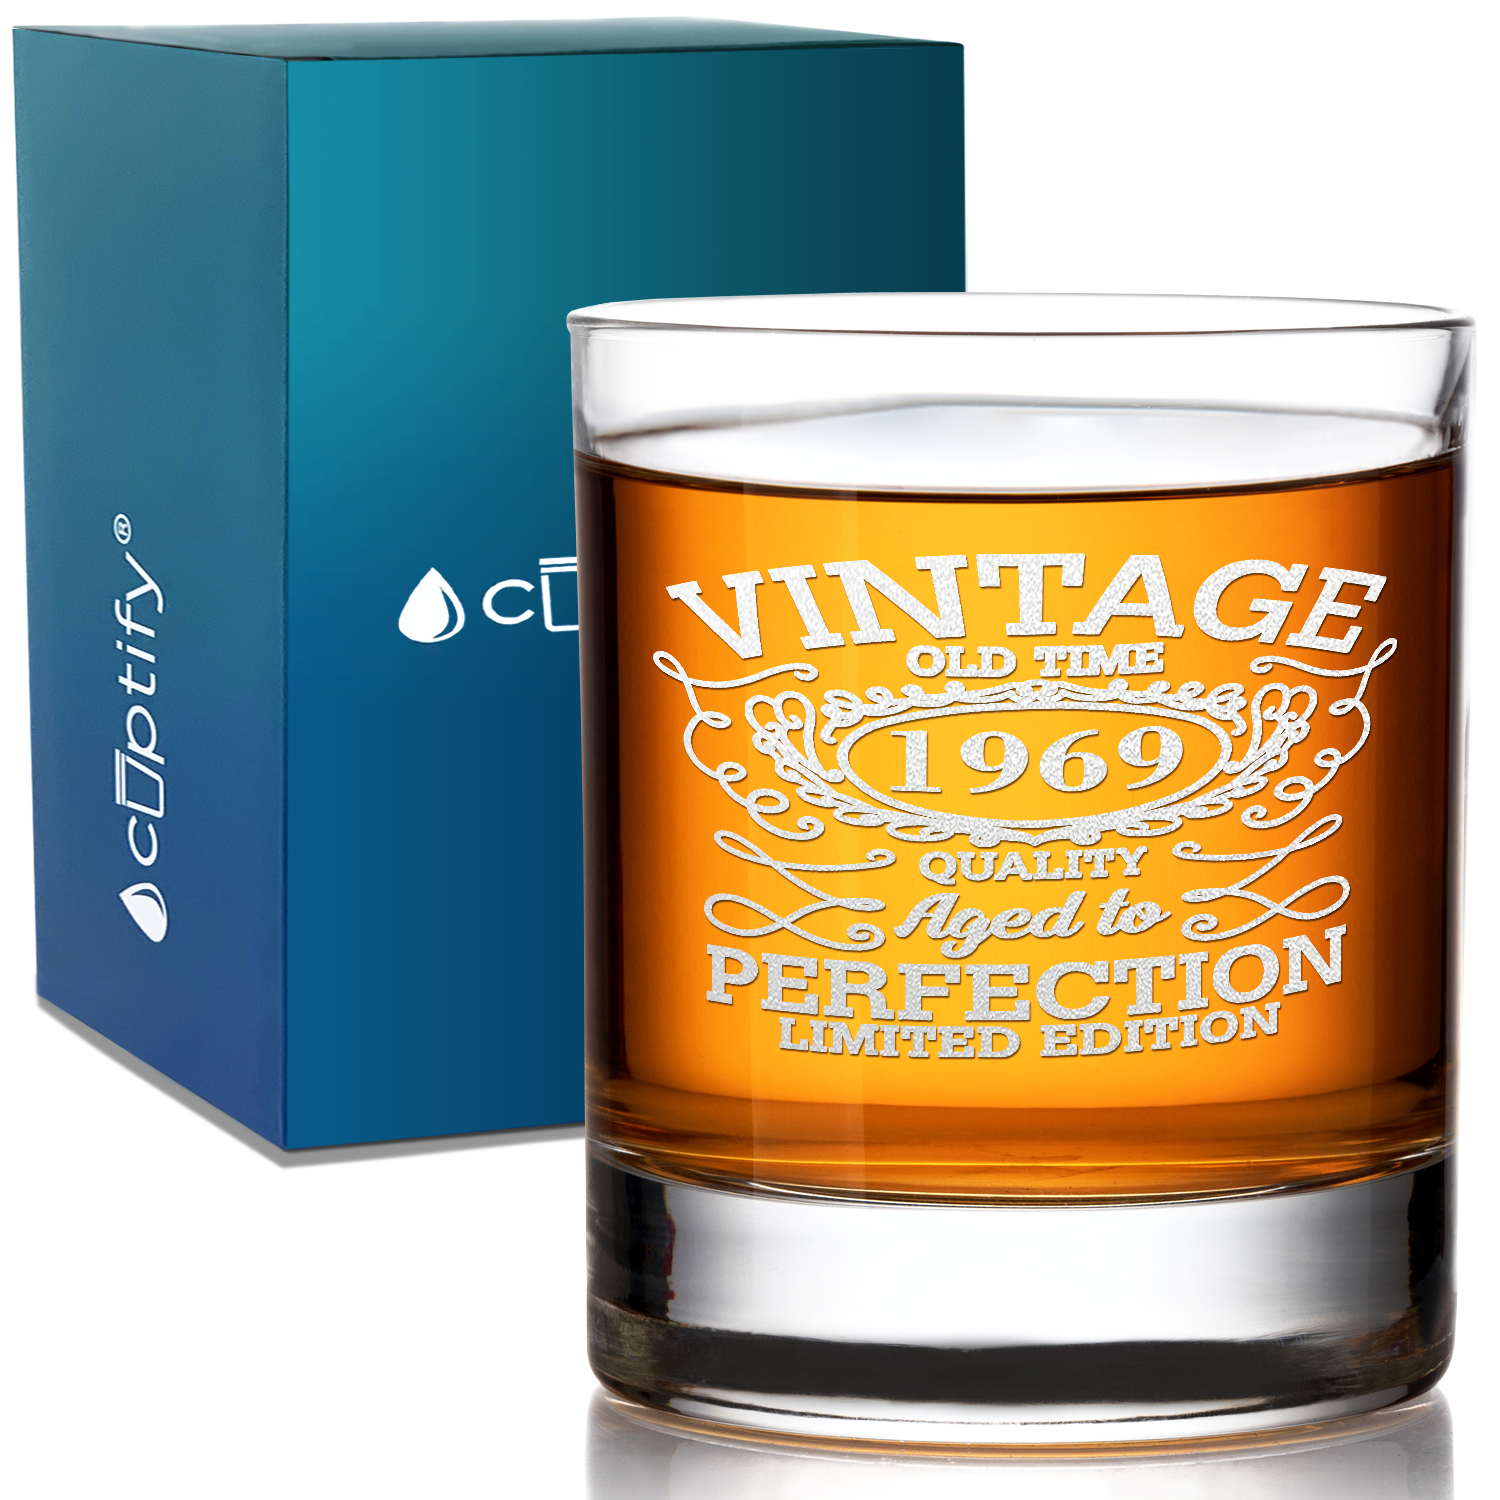 52nd Birthday Vintage 52 Years Old Time 1969 Quality Laser Engraved 10.25oz Old Fashion Glass